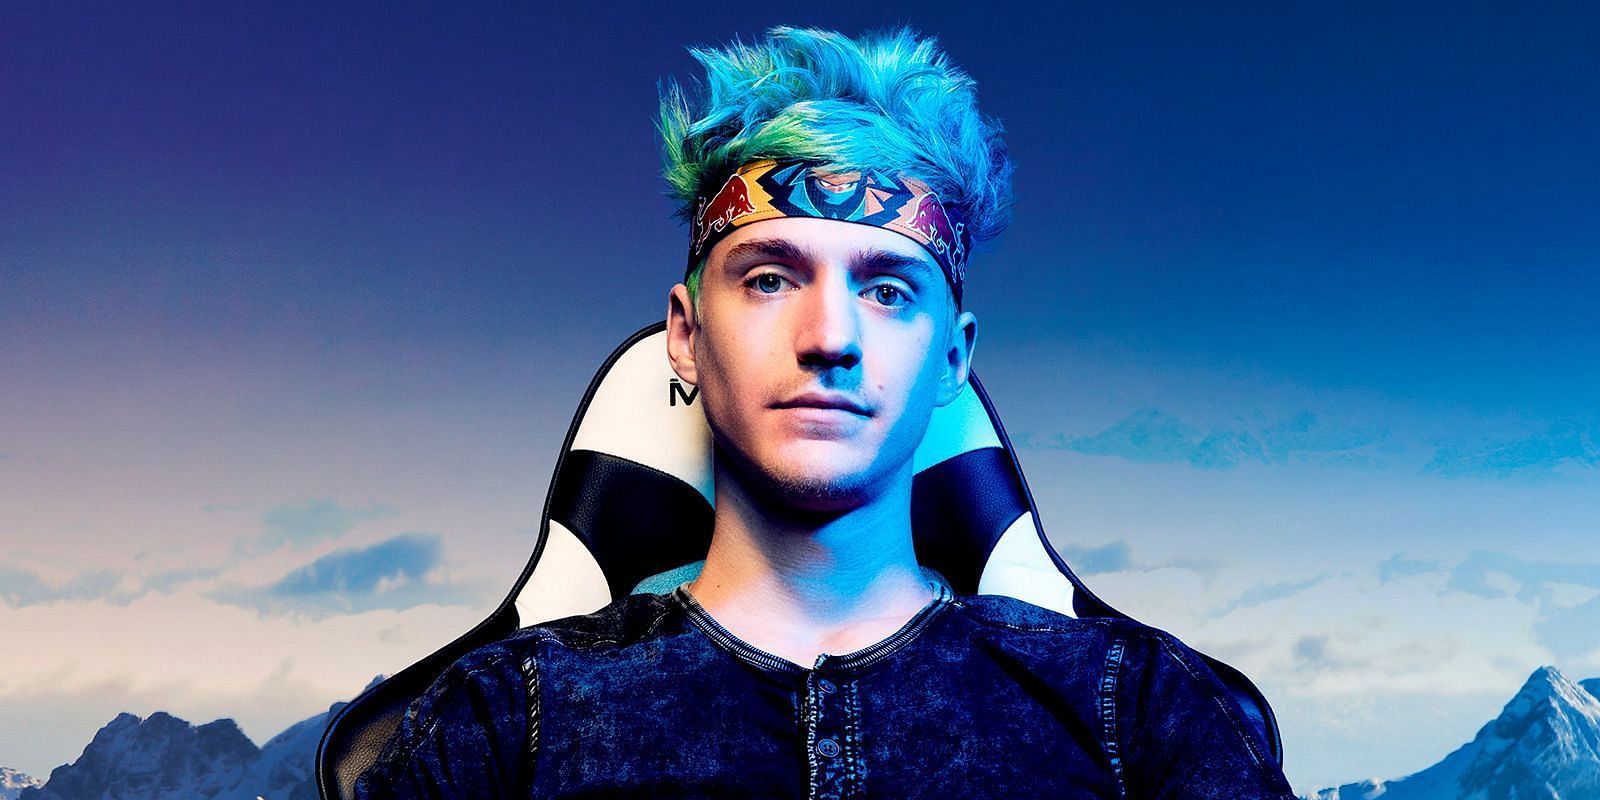 Ninja is back at Fortnite again and is giving away free codes for an entire cosmetic set.( Image via Ninja)